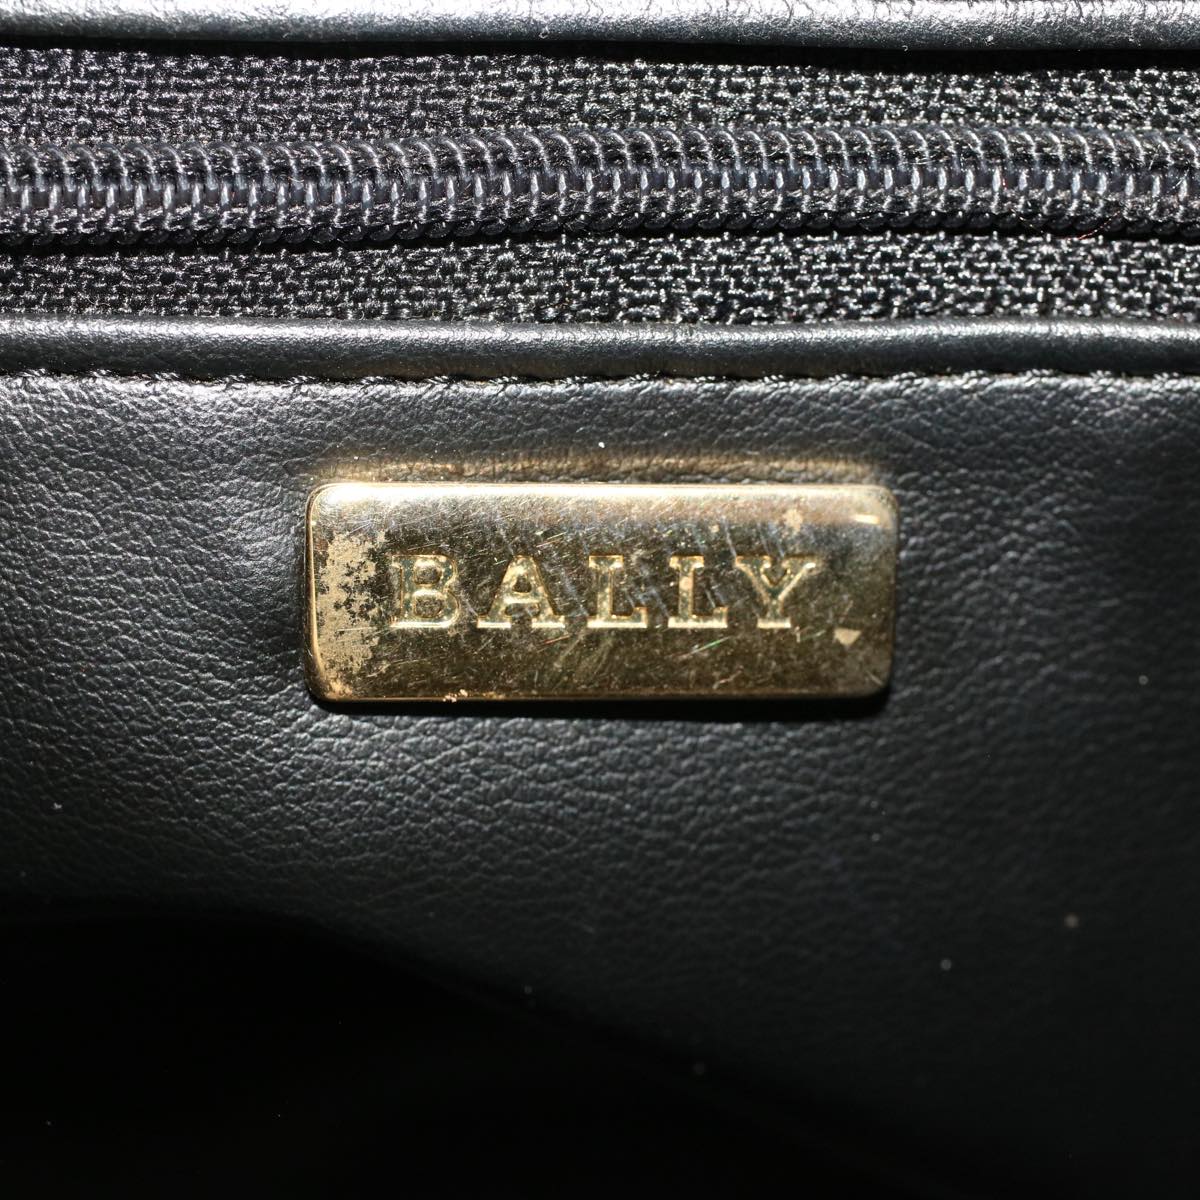 BALLY Quilted Chain Shoulder Bag Leather Black Auth yk7590